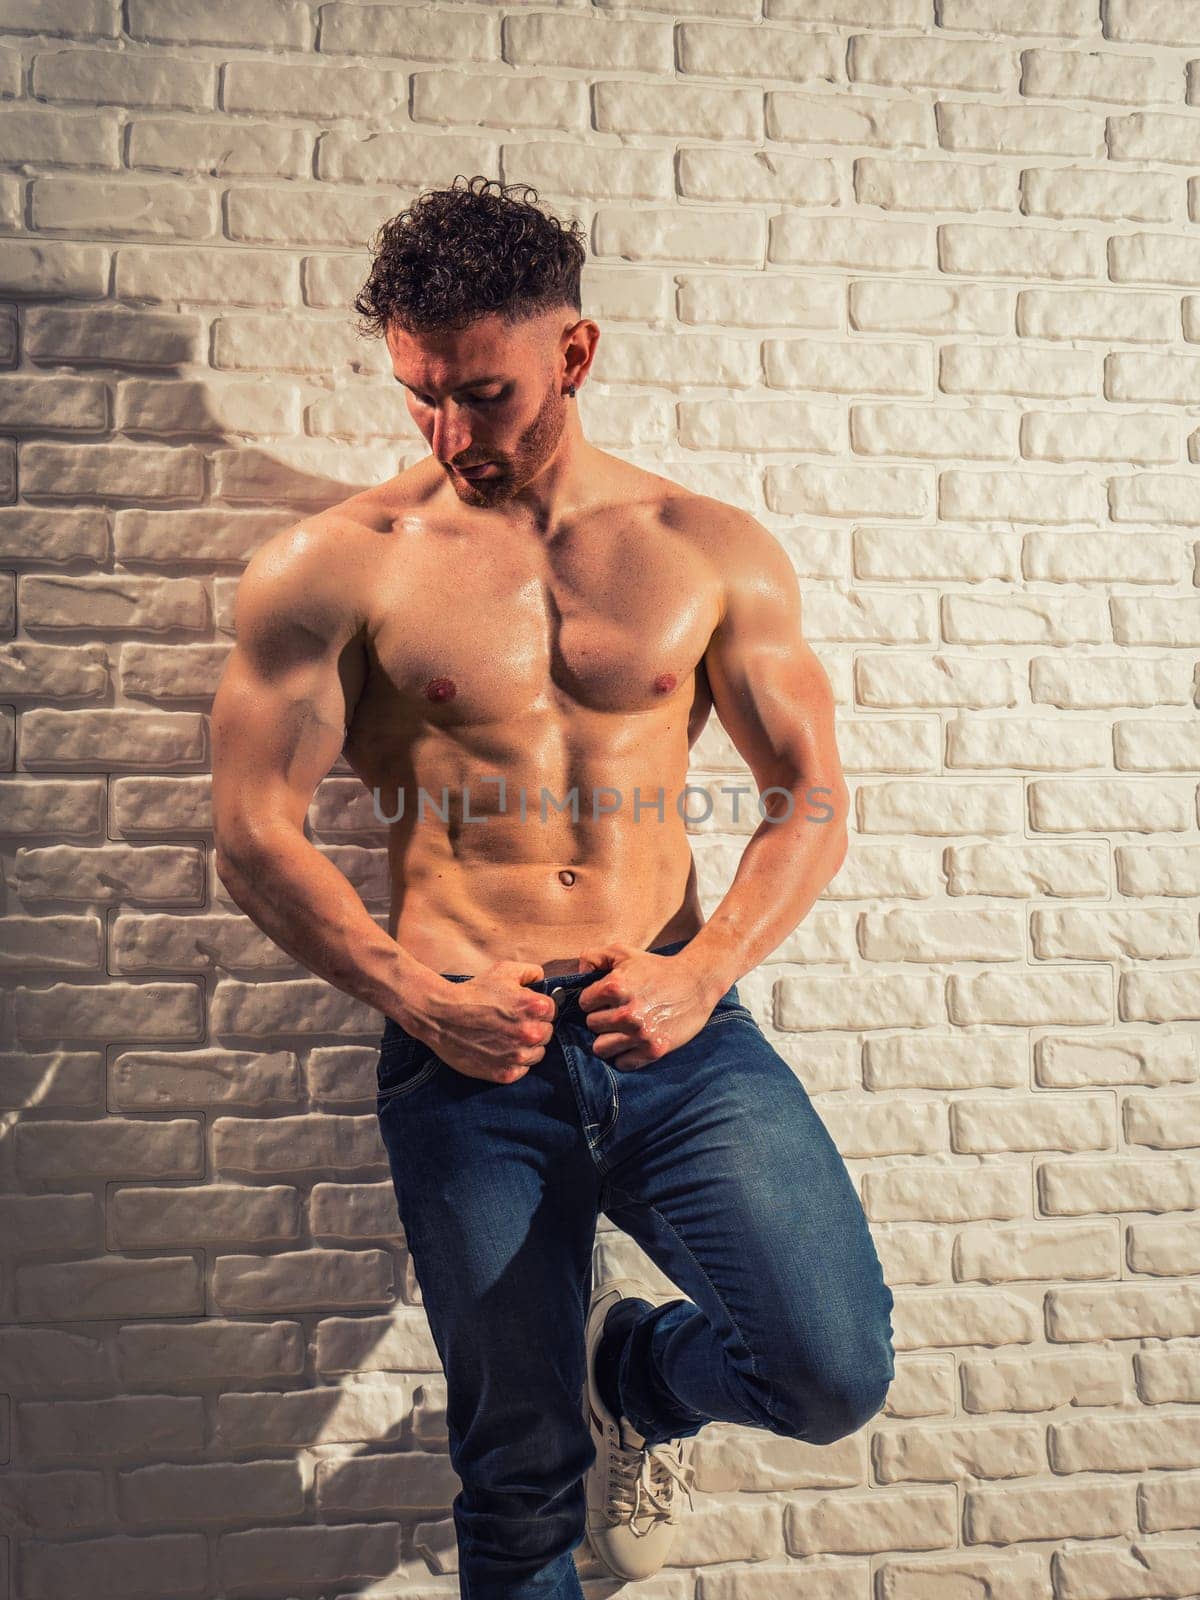 A shirtless man leaning against a brick wall